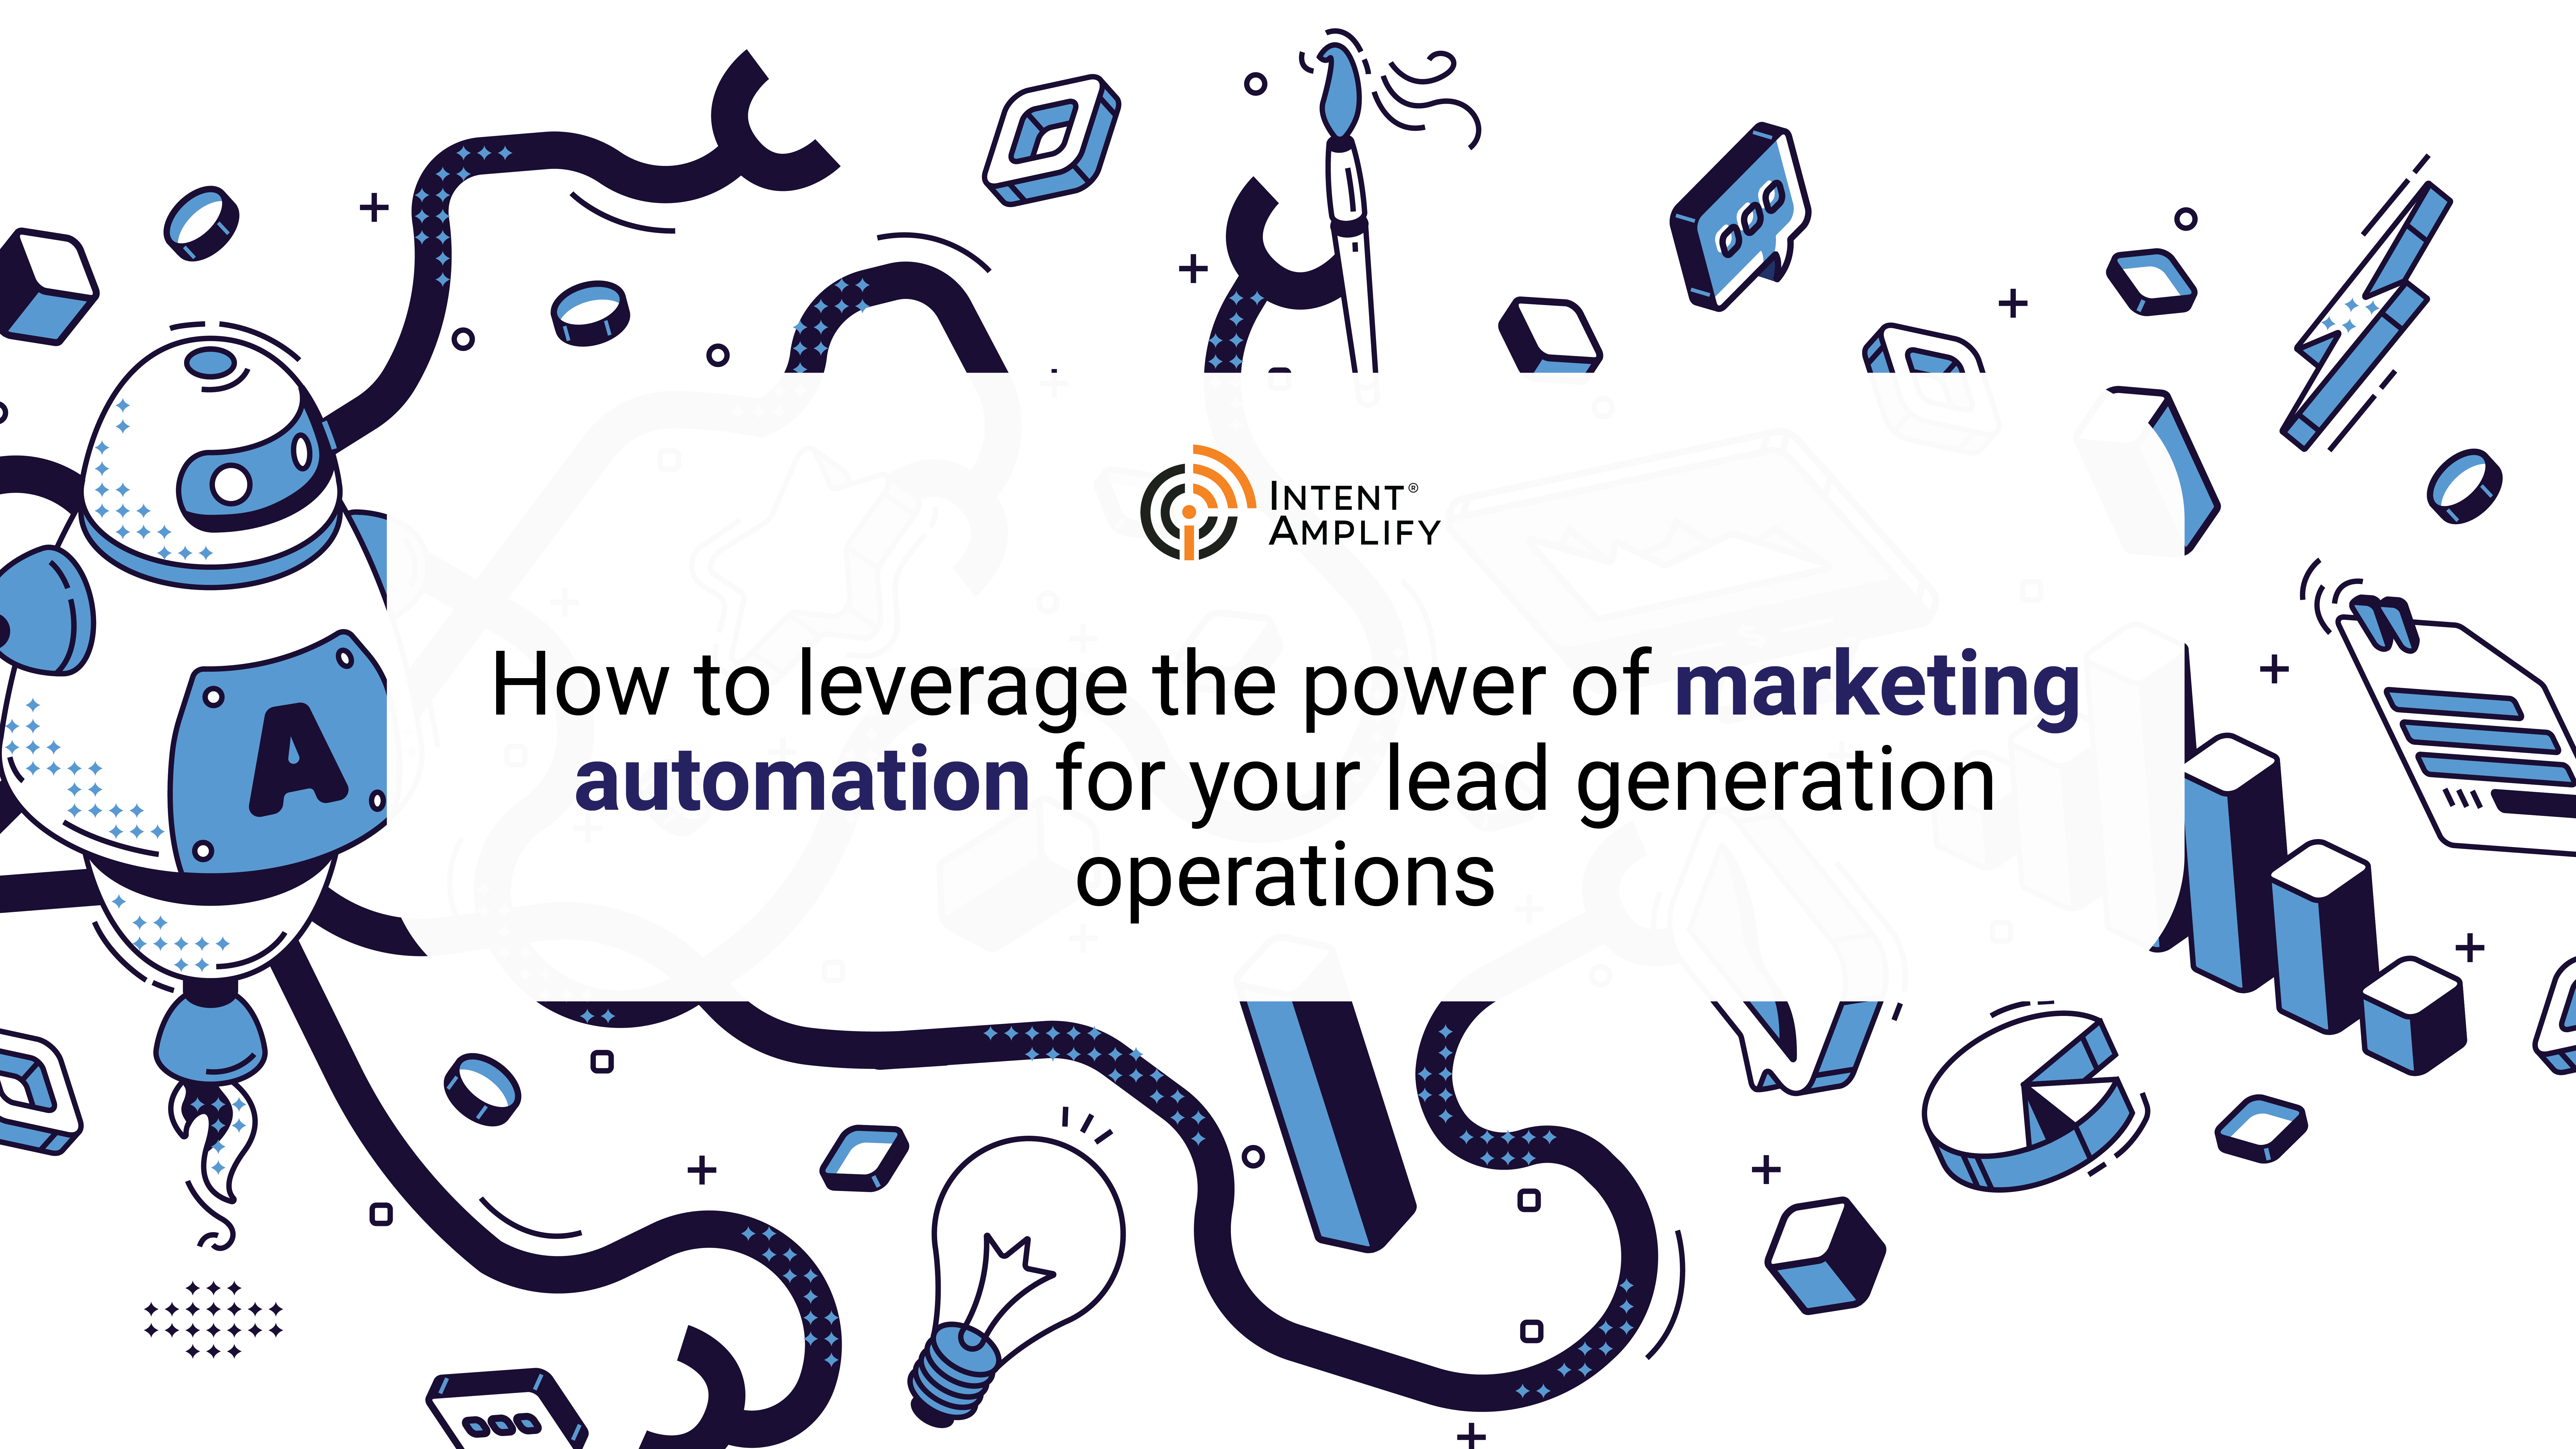 How to leverage the power of marketing automation for your lead generation operations